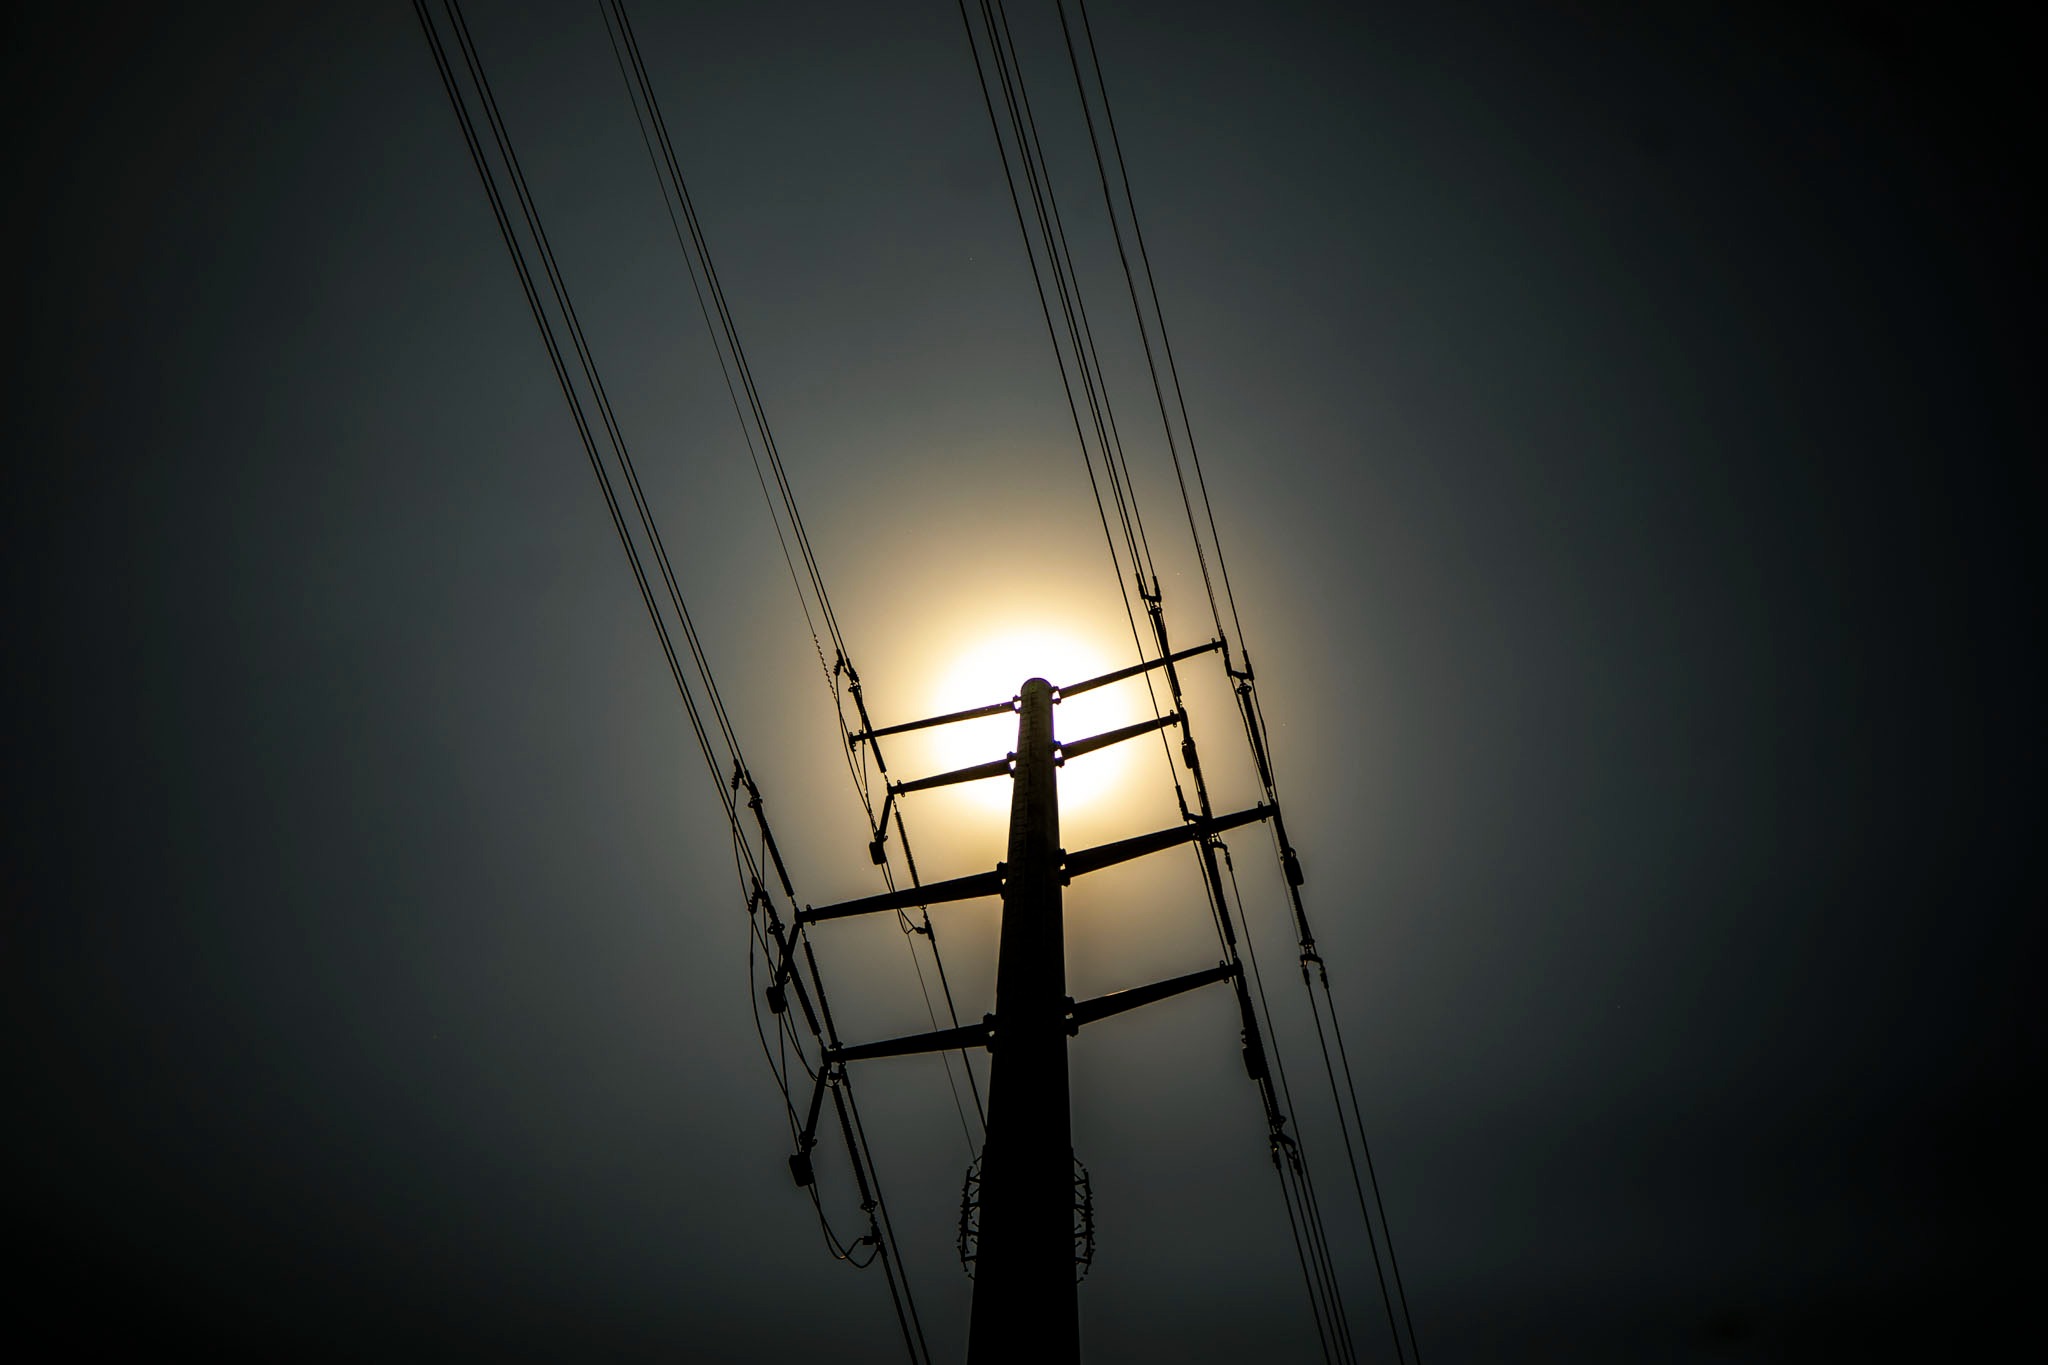 The shape of a utility pole is silhouetted by a bright orange sun.